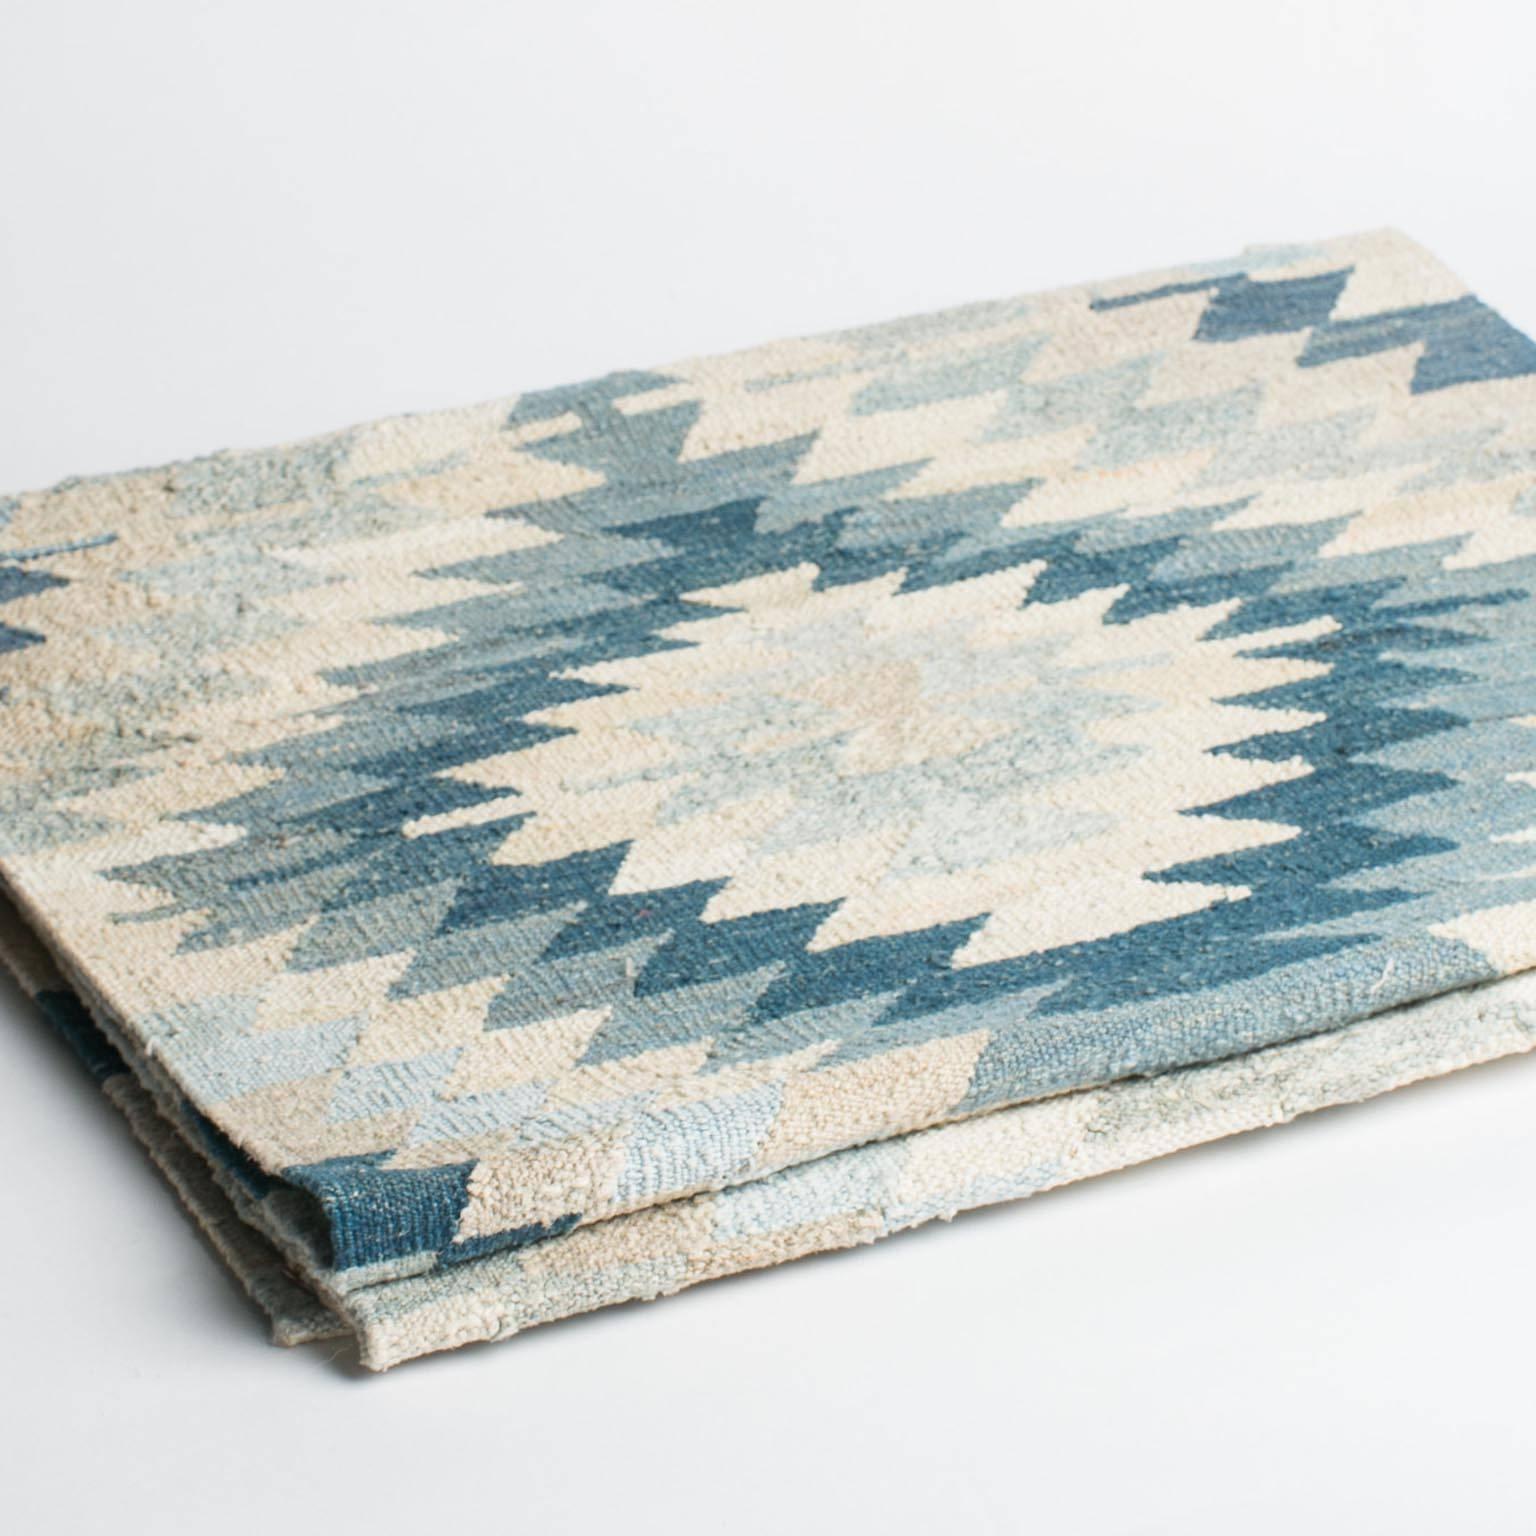 A gorgeous Turkish Kilim constructed completely from vintage wool, giving it a vintage edge with a modern twist. Perfect for a hallway, entry or any space with in need of a long runner. This rug is absolutely stunning-a wonderful blend of old